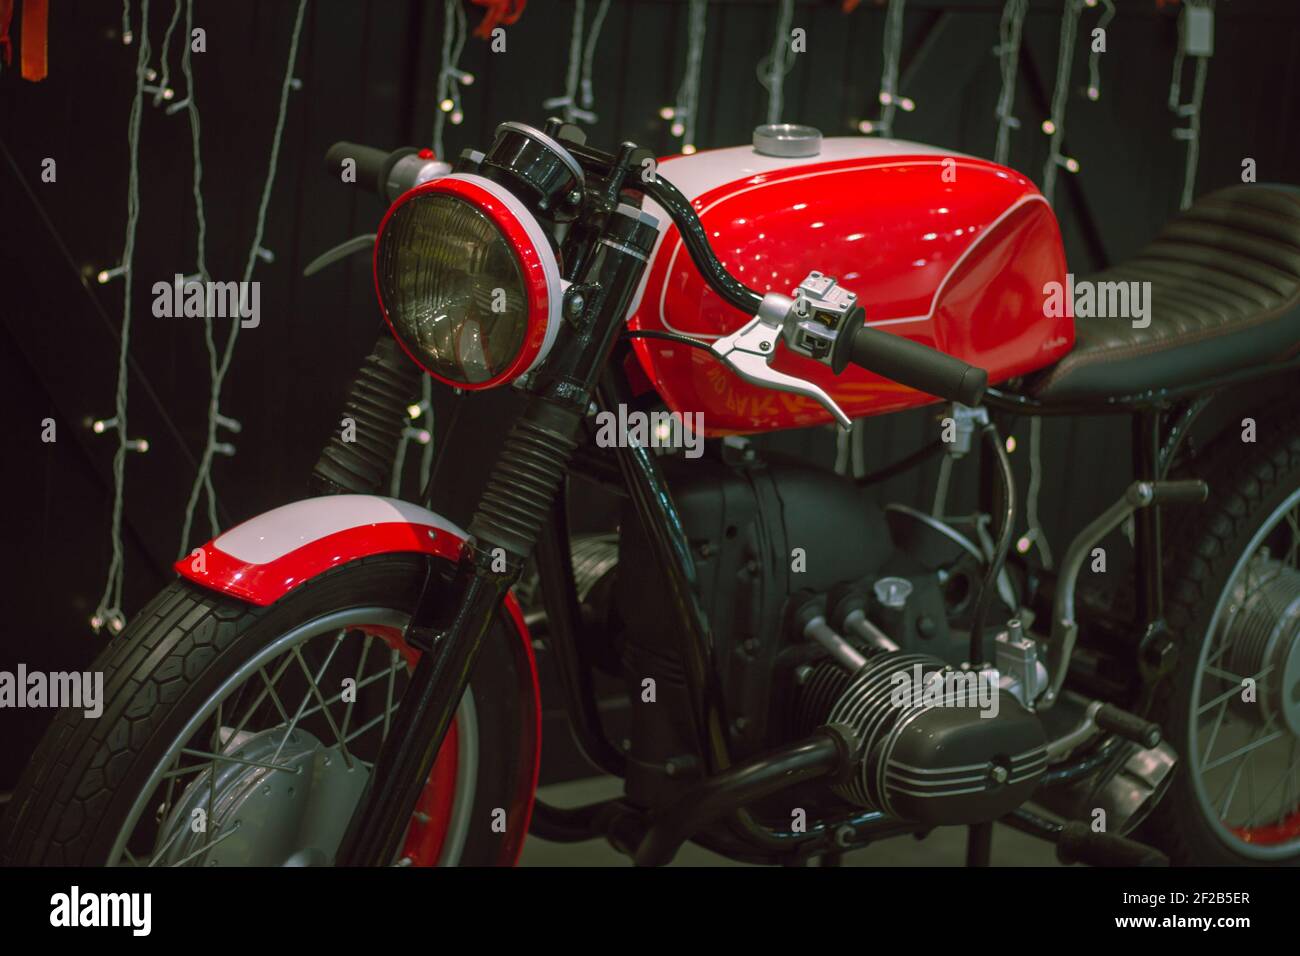 Red classic style motorcycle, with black frame and steering wheel Stock Photo